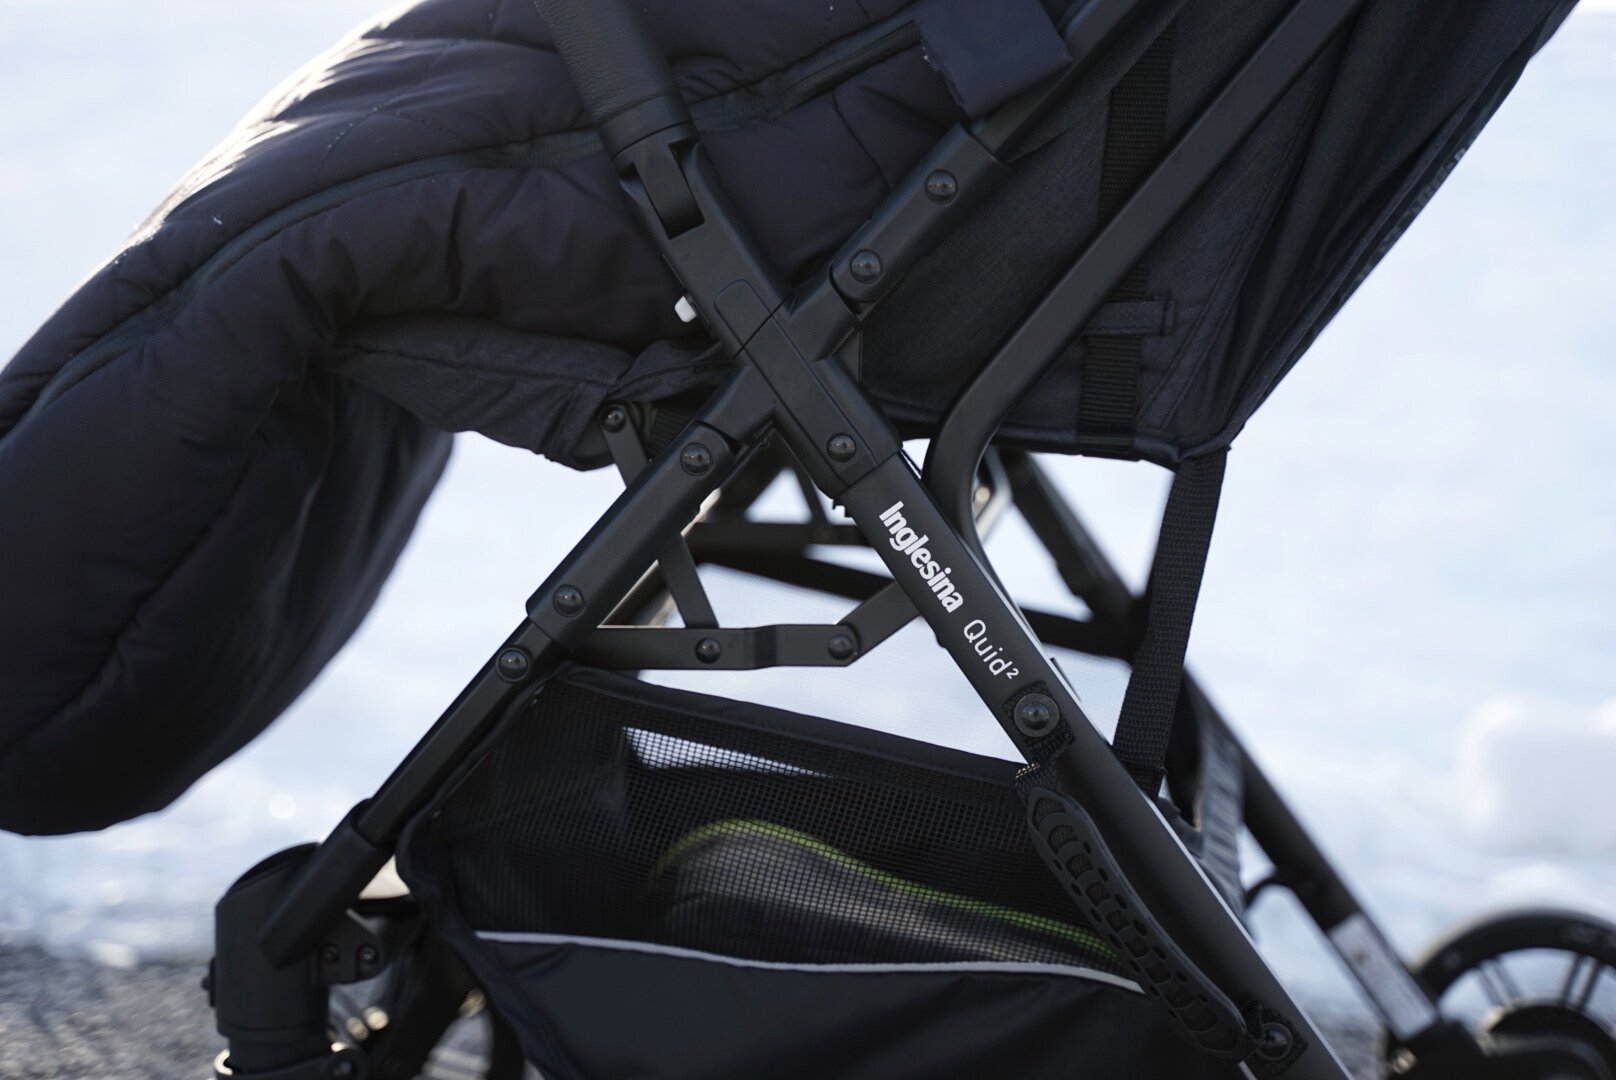 Review: Inglesina Quid Stroller — The Ordinary Wongs